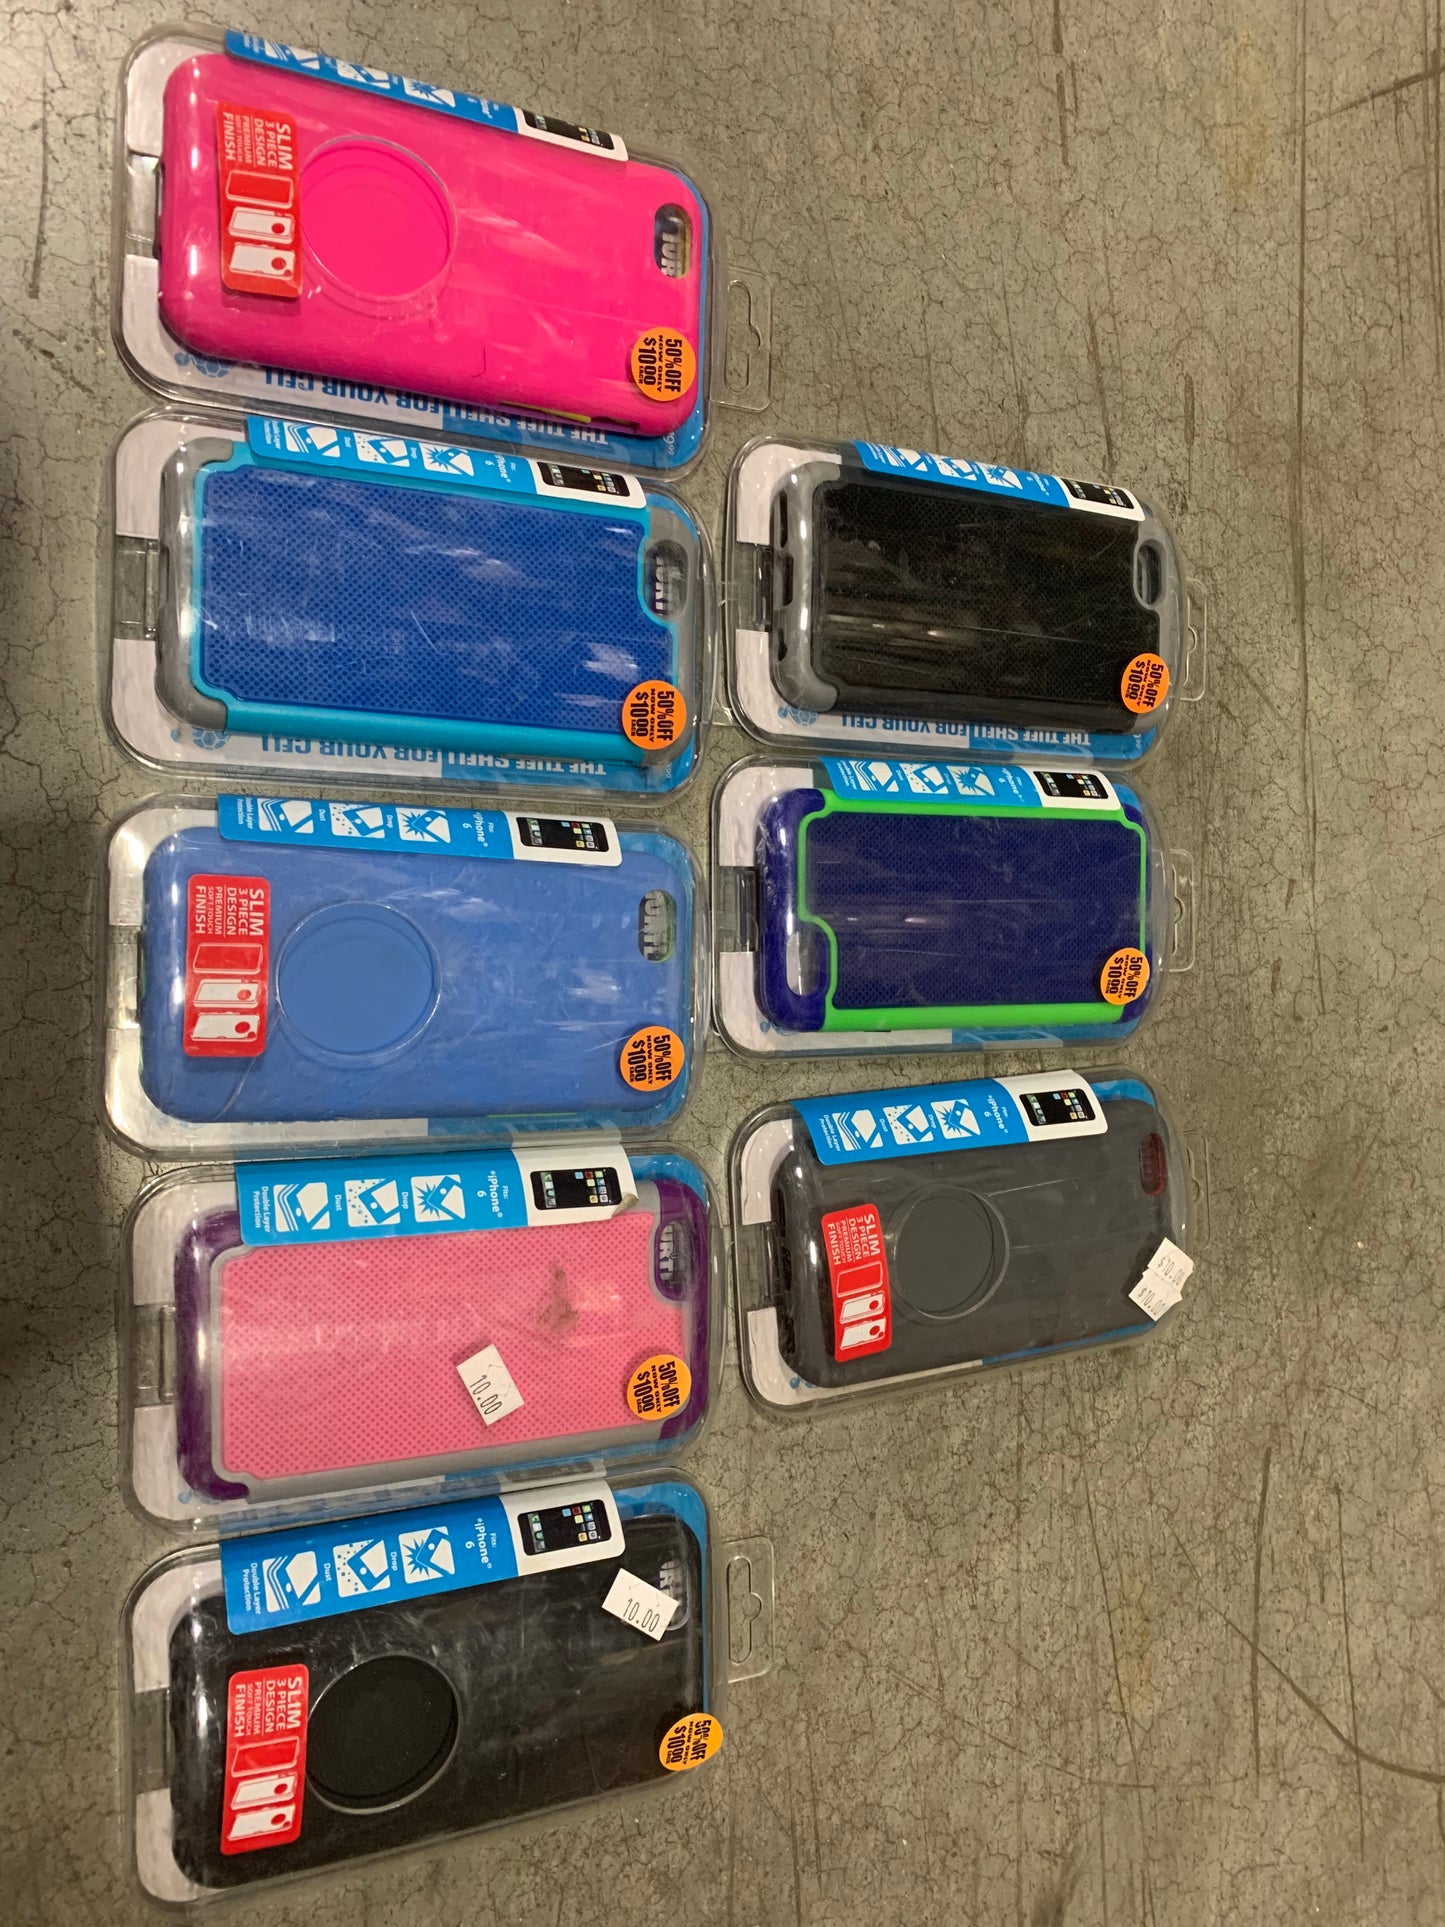 ITEM NUMBER 021075L MIXED CELL CASE IP6 - STORE SURPLUS NO DISPLAY 13 PIECES PER PACK